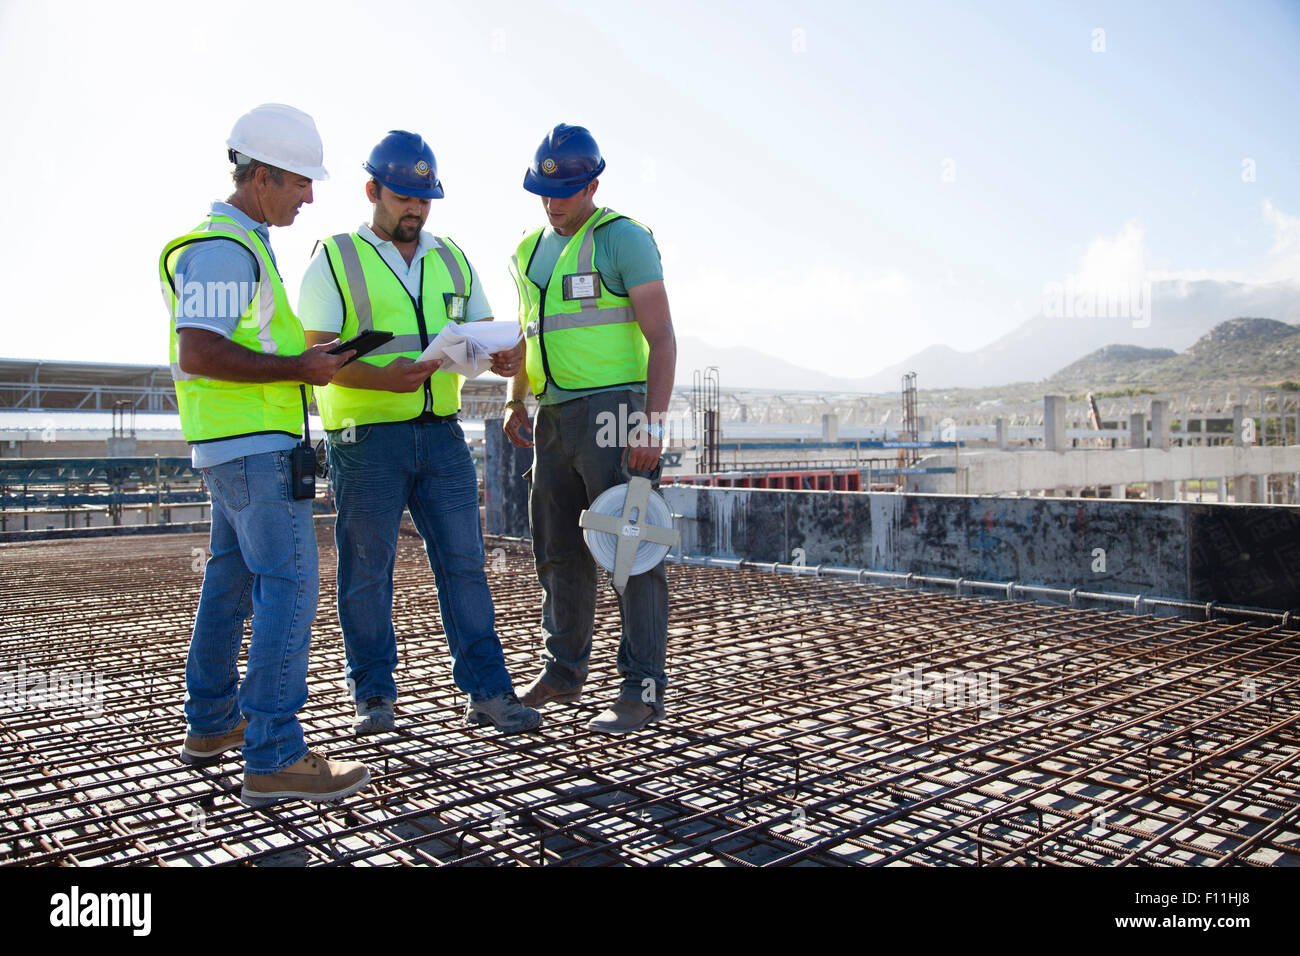 Construction workers talking on rebar at construction site Stock Photo